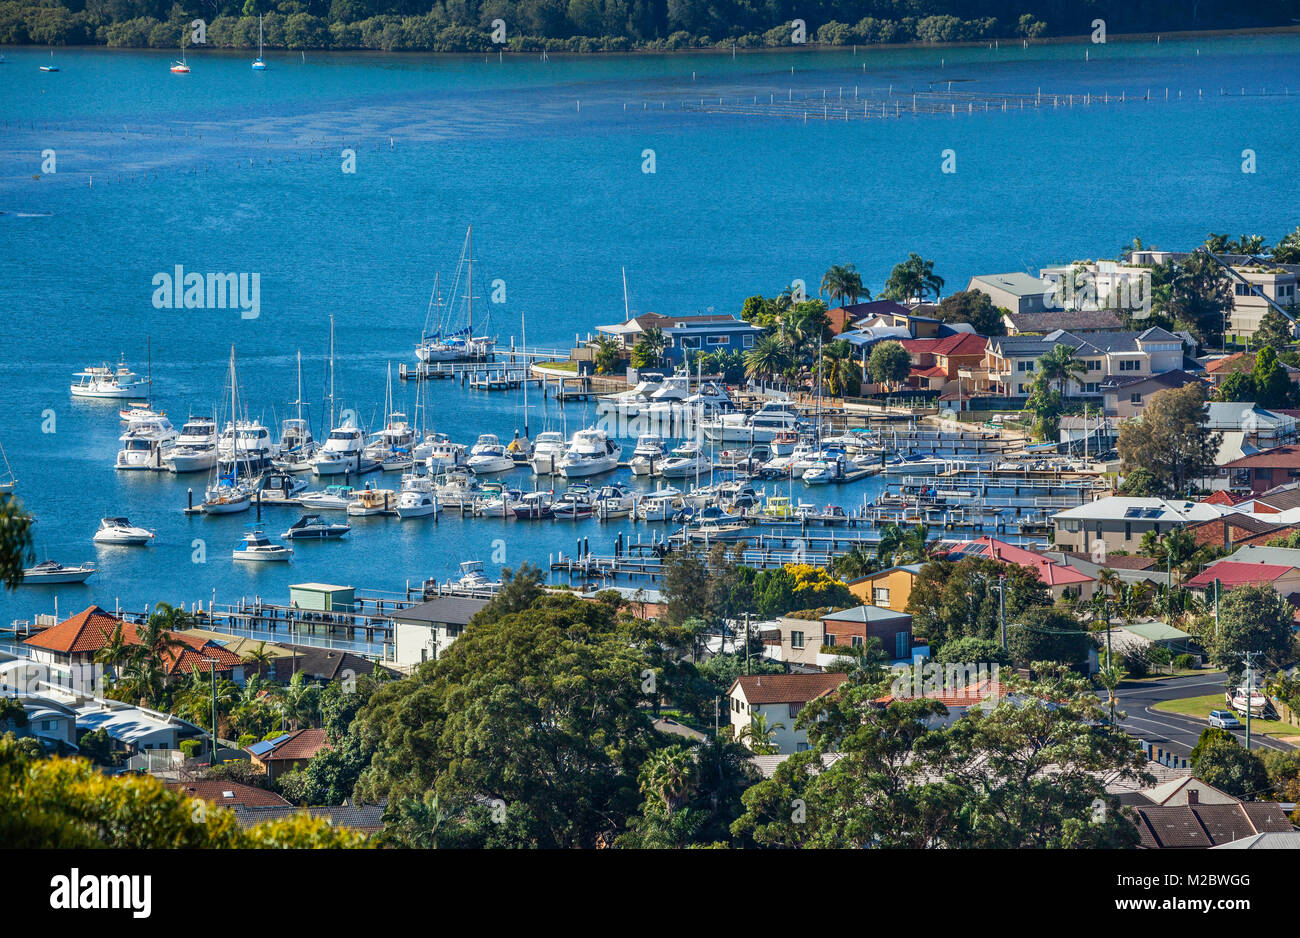 Australia, New South Wales, Central Coast, Brisbane Water, view of Booker Bay wharfes and marinas Stock Photo